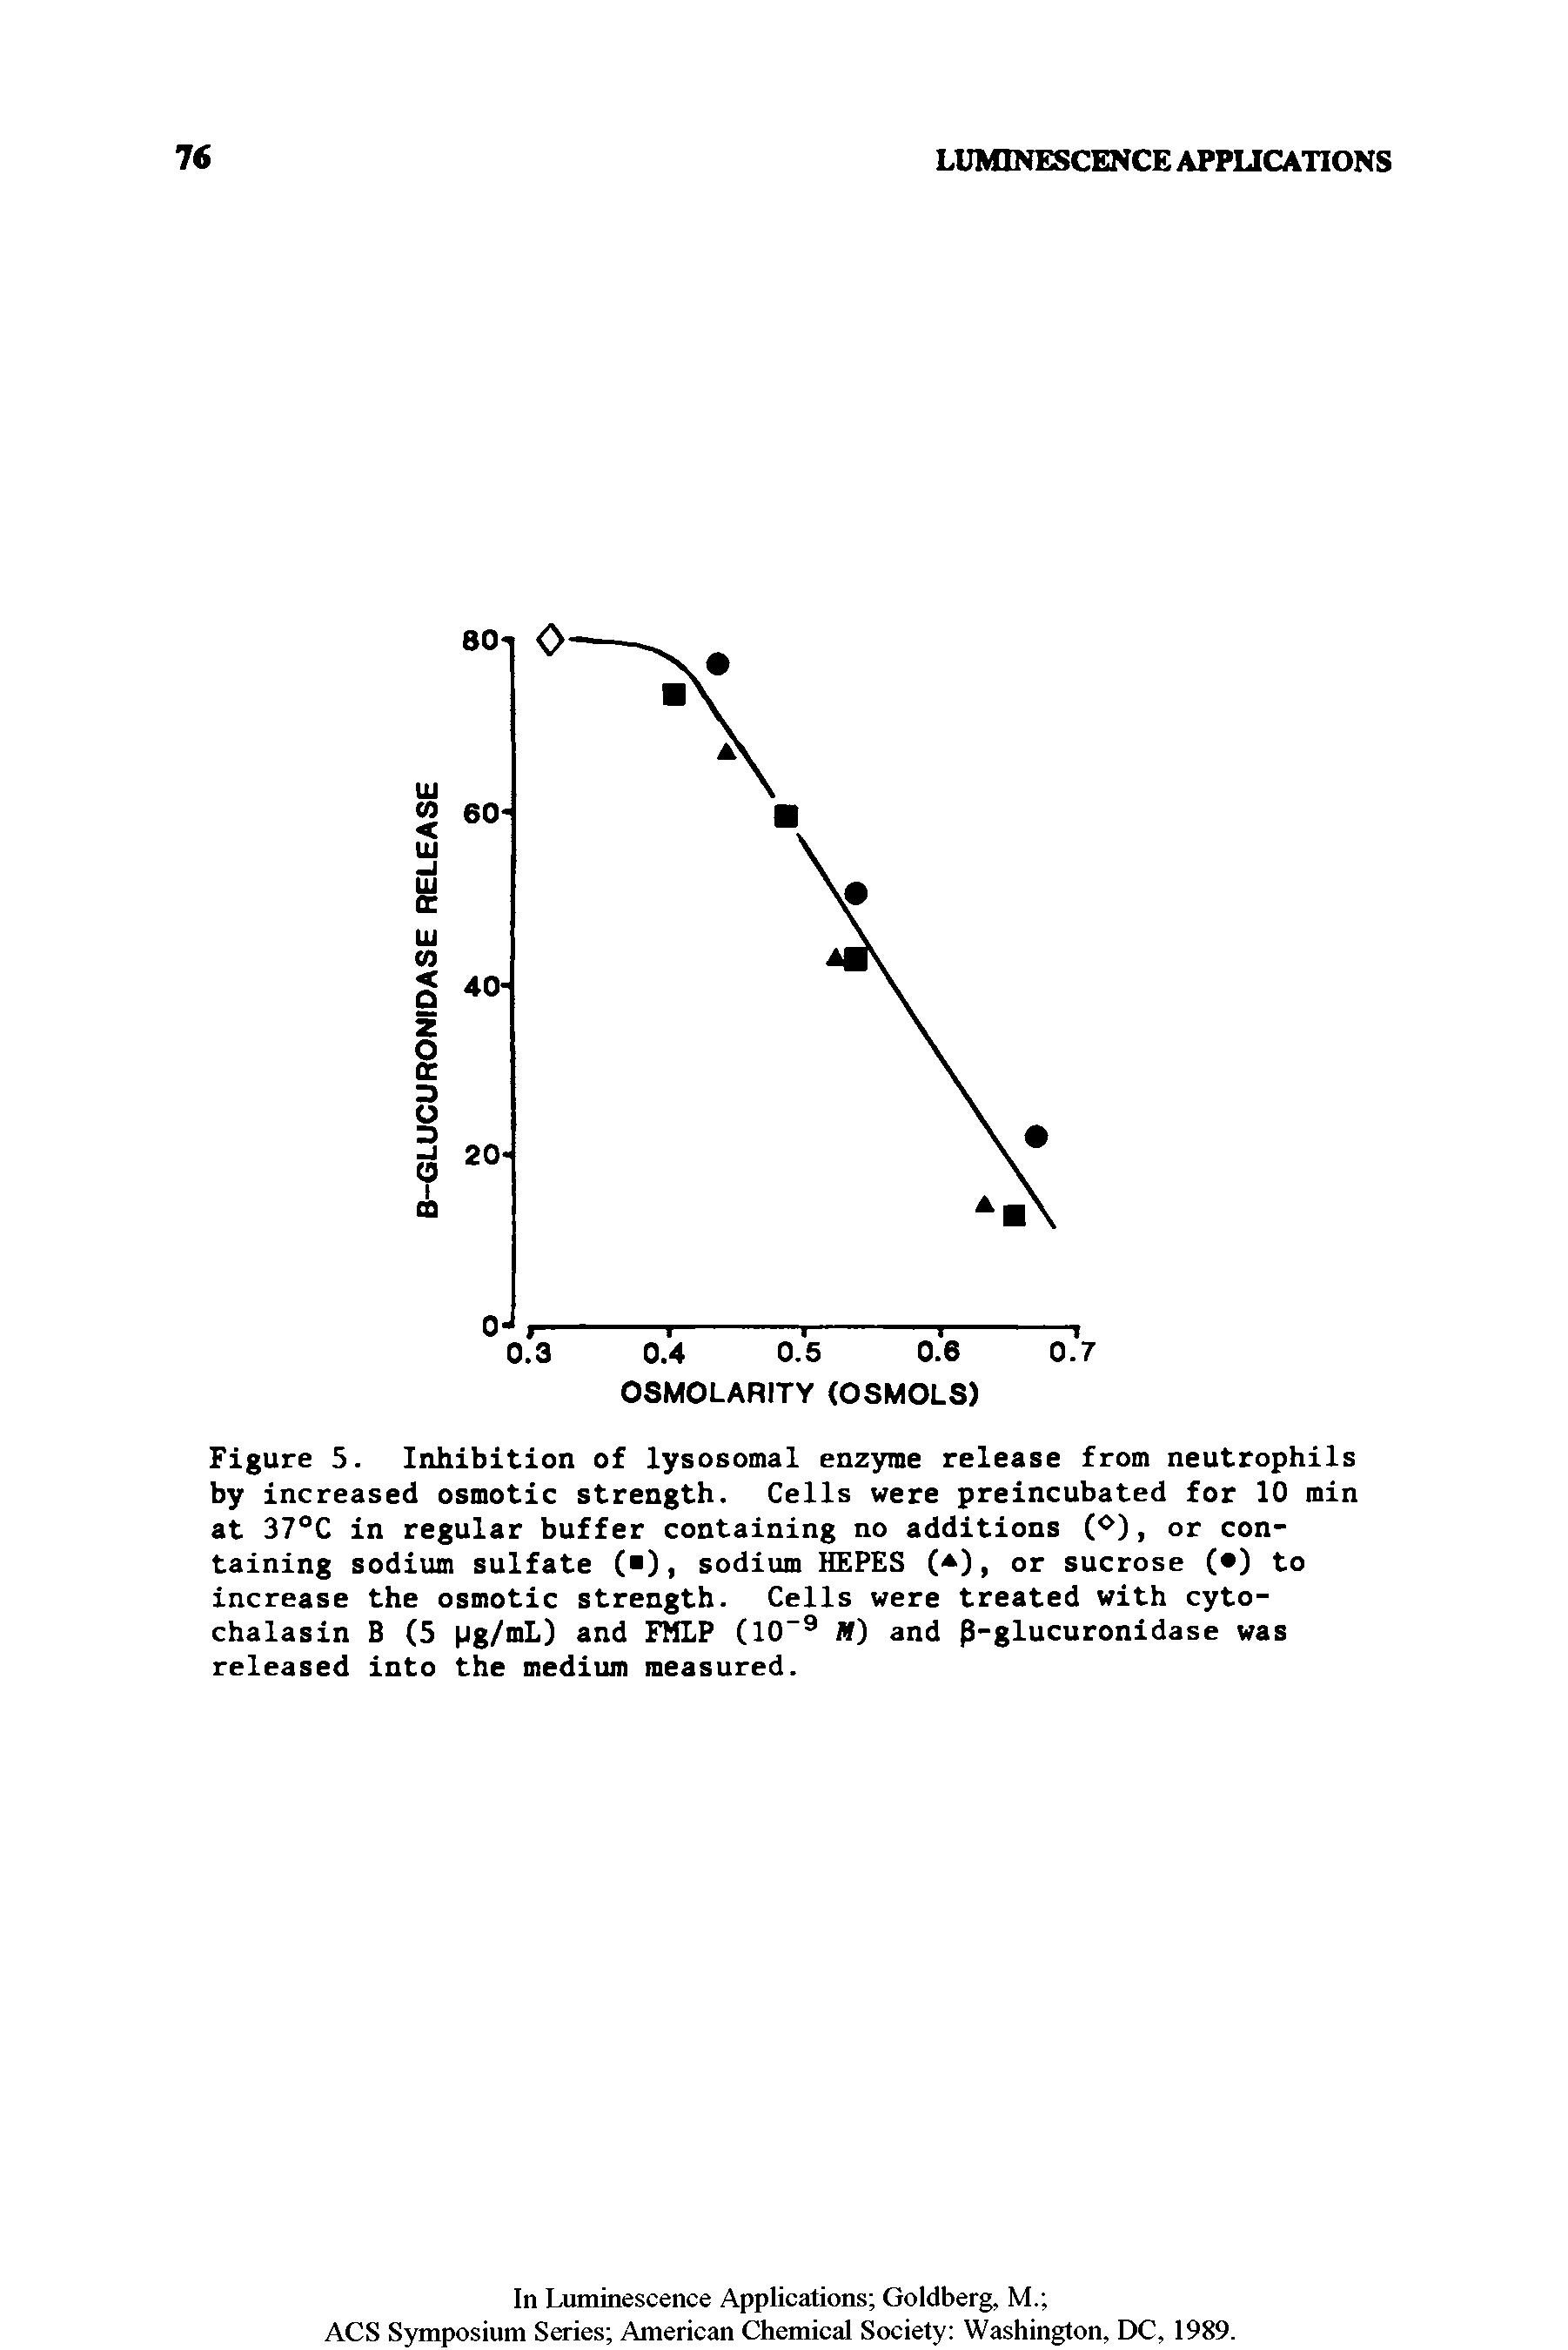 Figure 5. Inhibition of lysosomal enzyme release from neutrophils by increased osmotic strength. Cells were preincubated for 10 min at 37°C in regular buffer containing no additions (o), or containing sodium sulfate ( ), sodium HEPES ( ), or sucrose ( ) to increase the osmotic strength. Cells were treated with cyto-chalasin B (5 arid FMLP (10" M) and p-glucuronidase was...